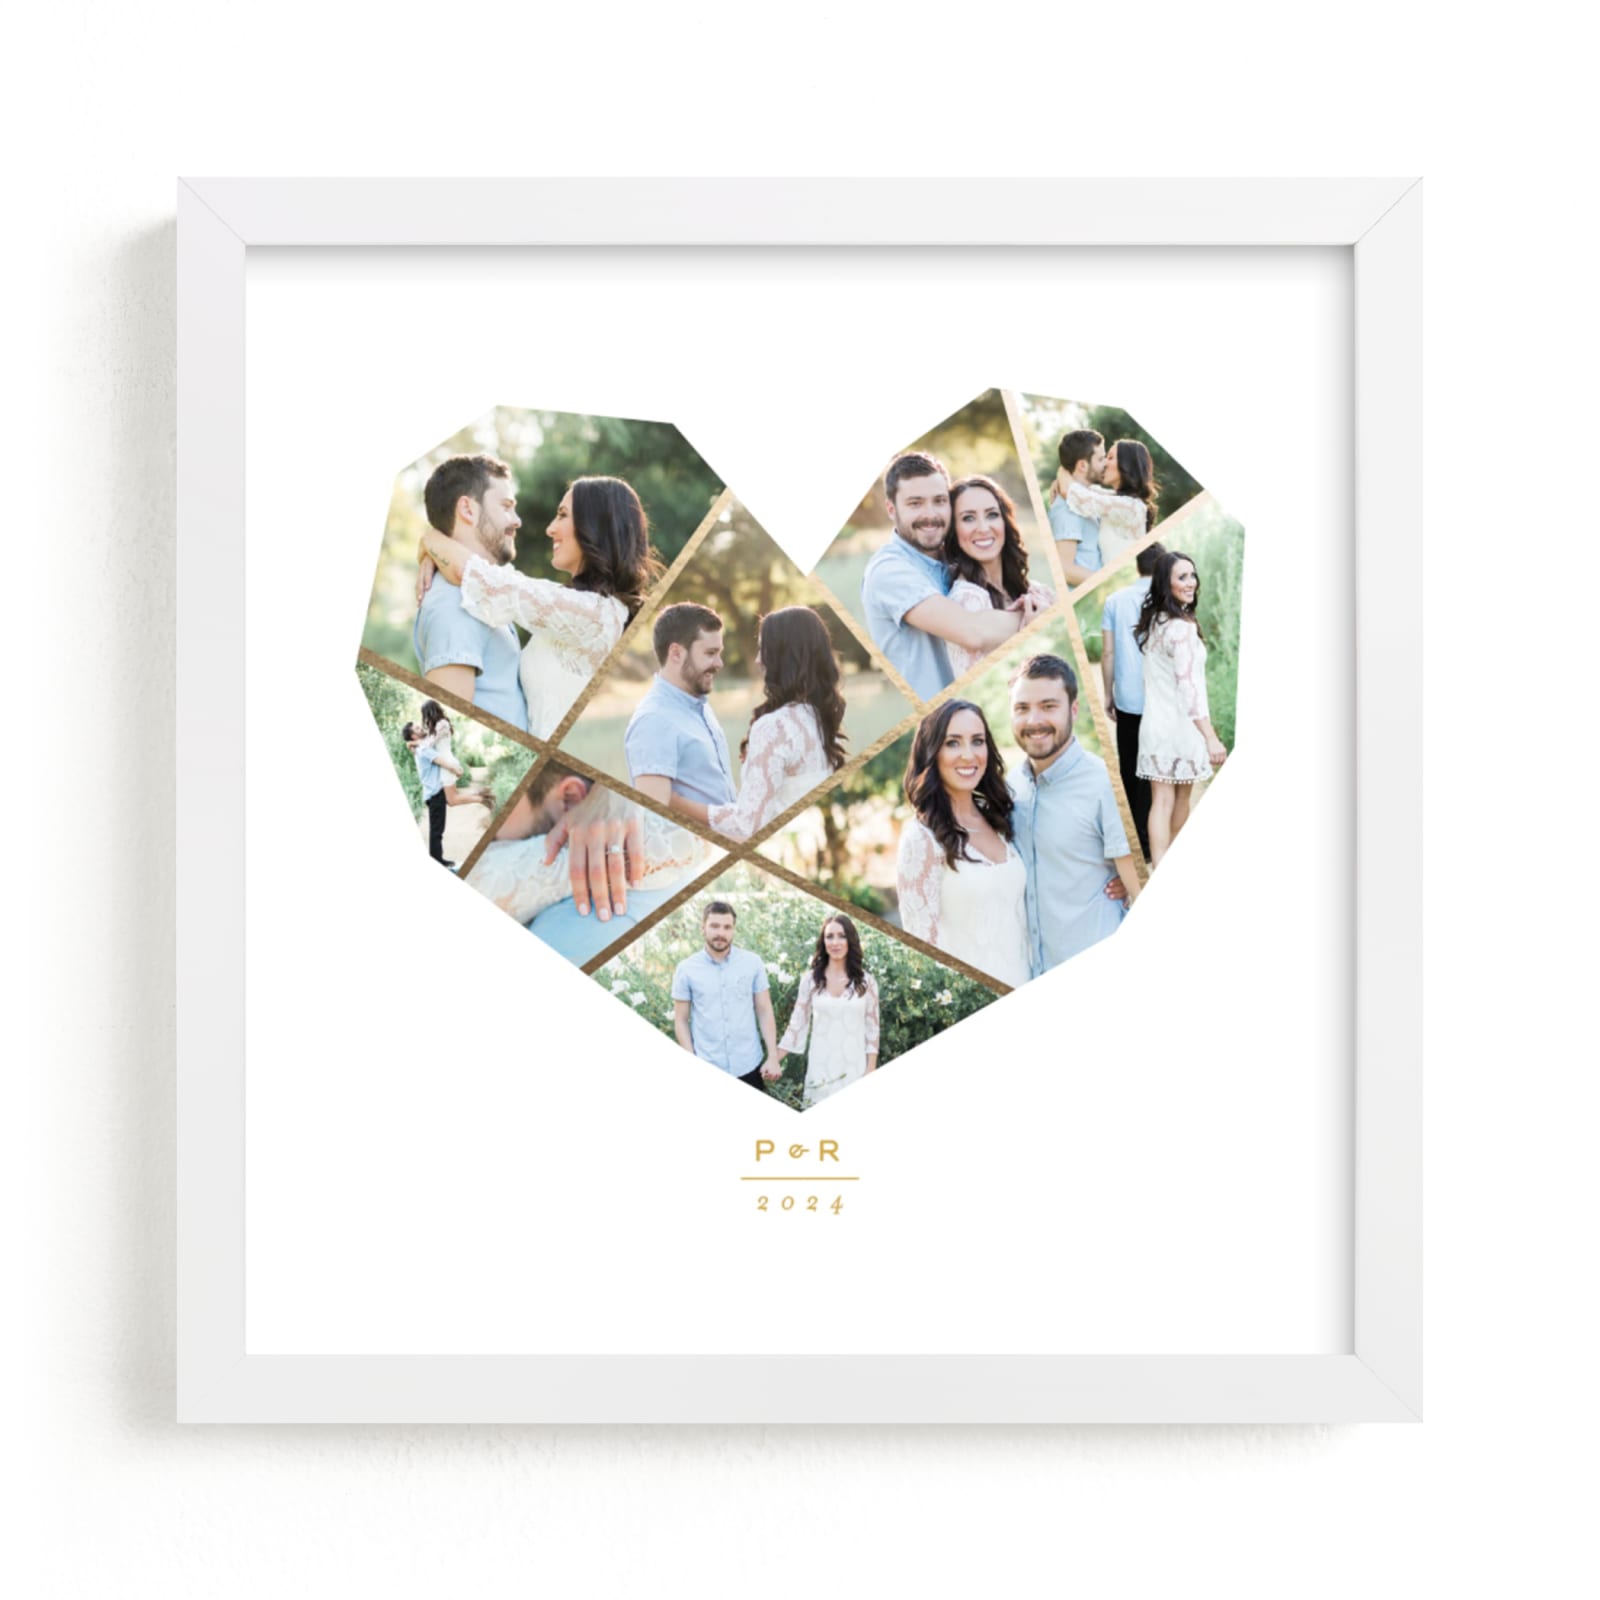 This is a gold foil stamped photo art by fatfatin called Complete Love Foil.